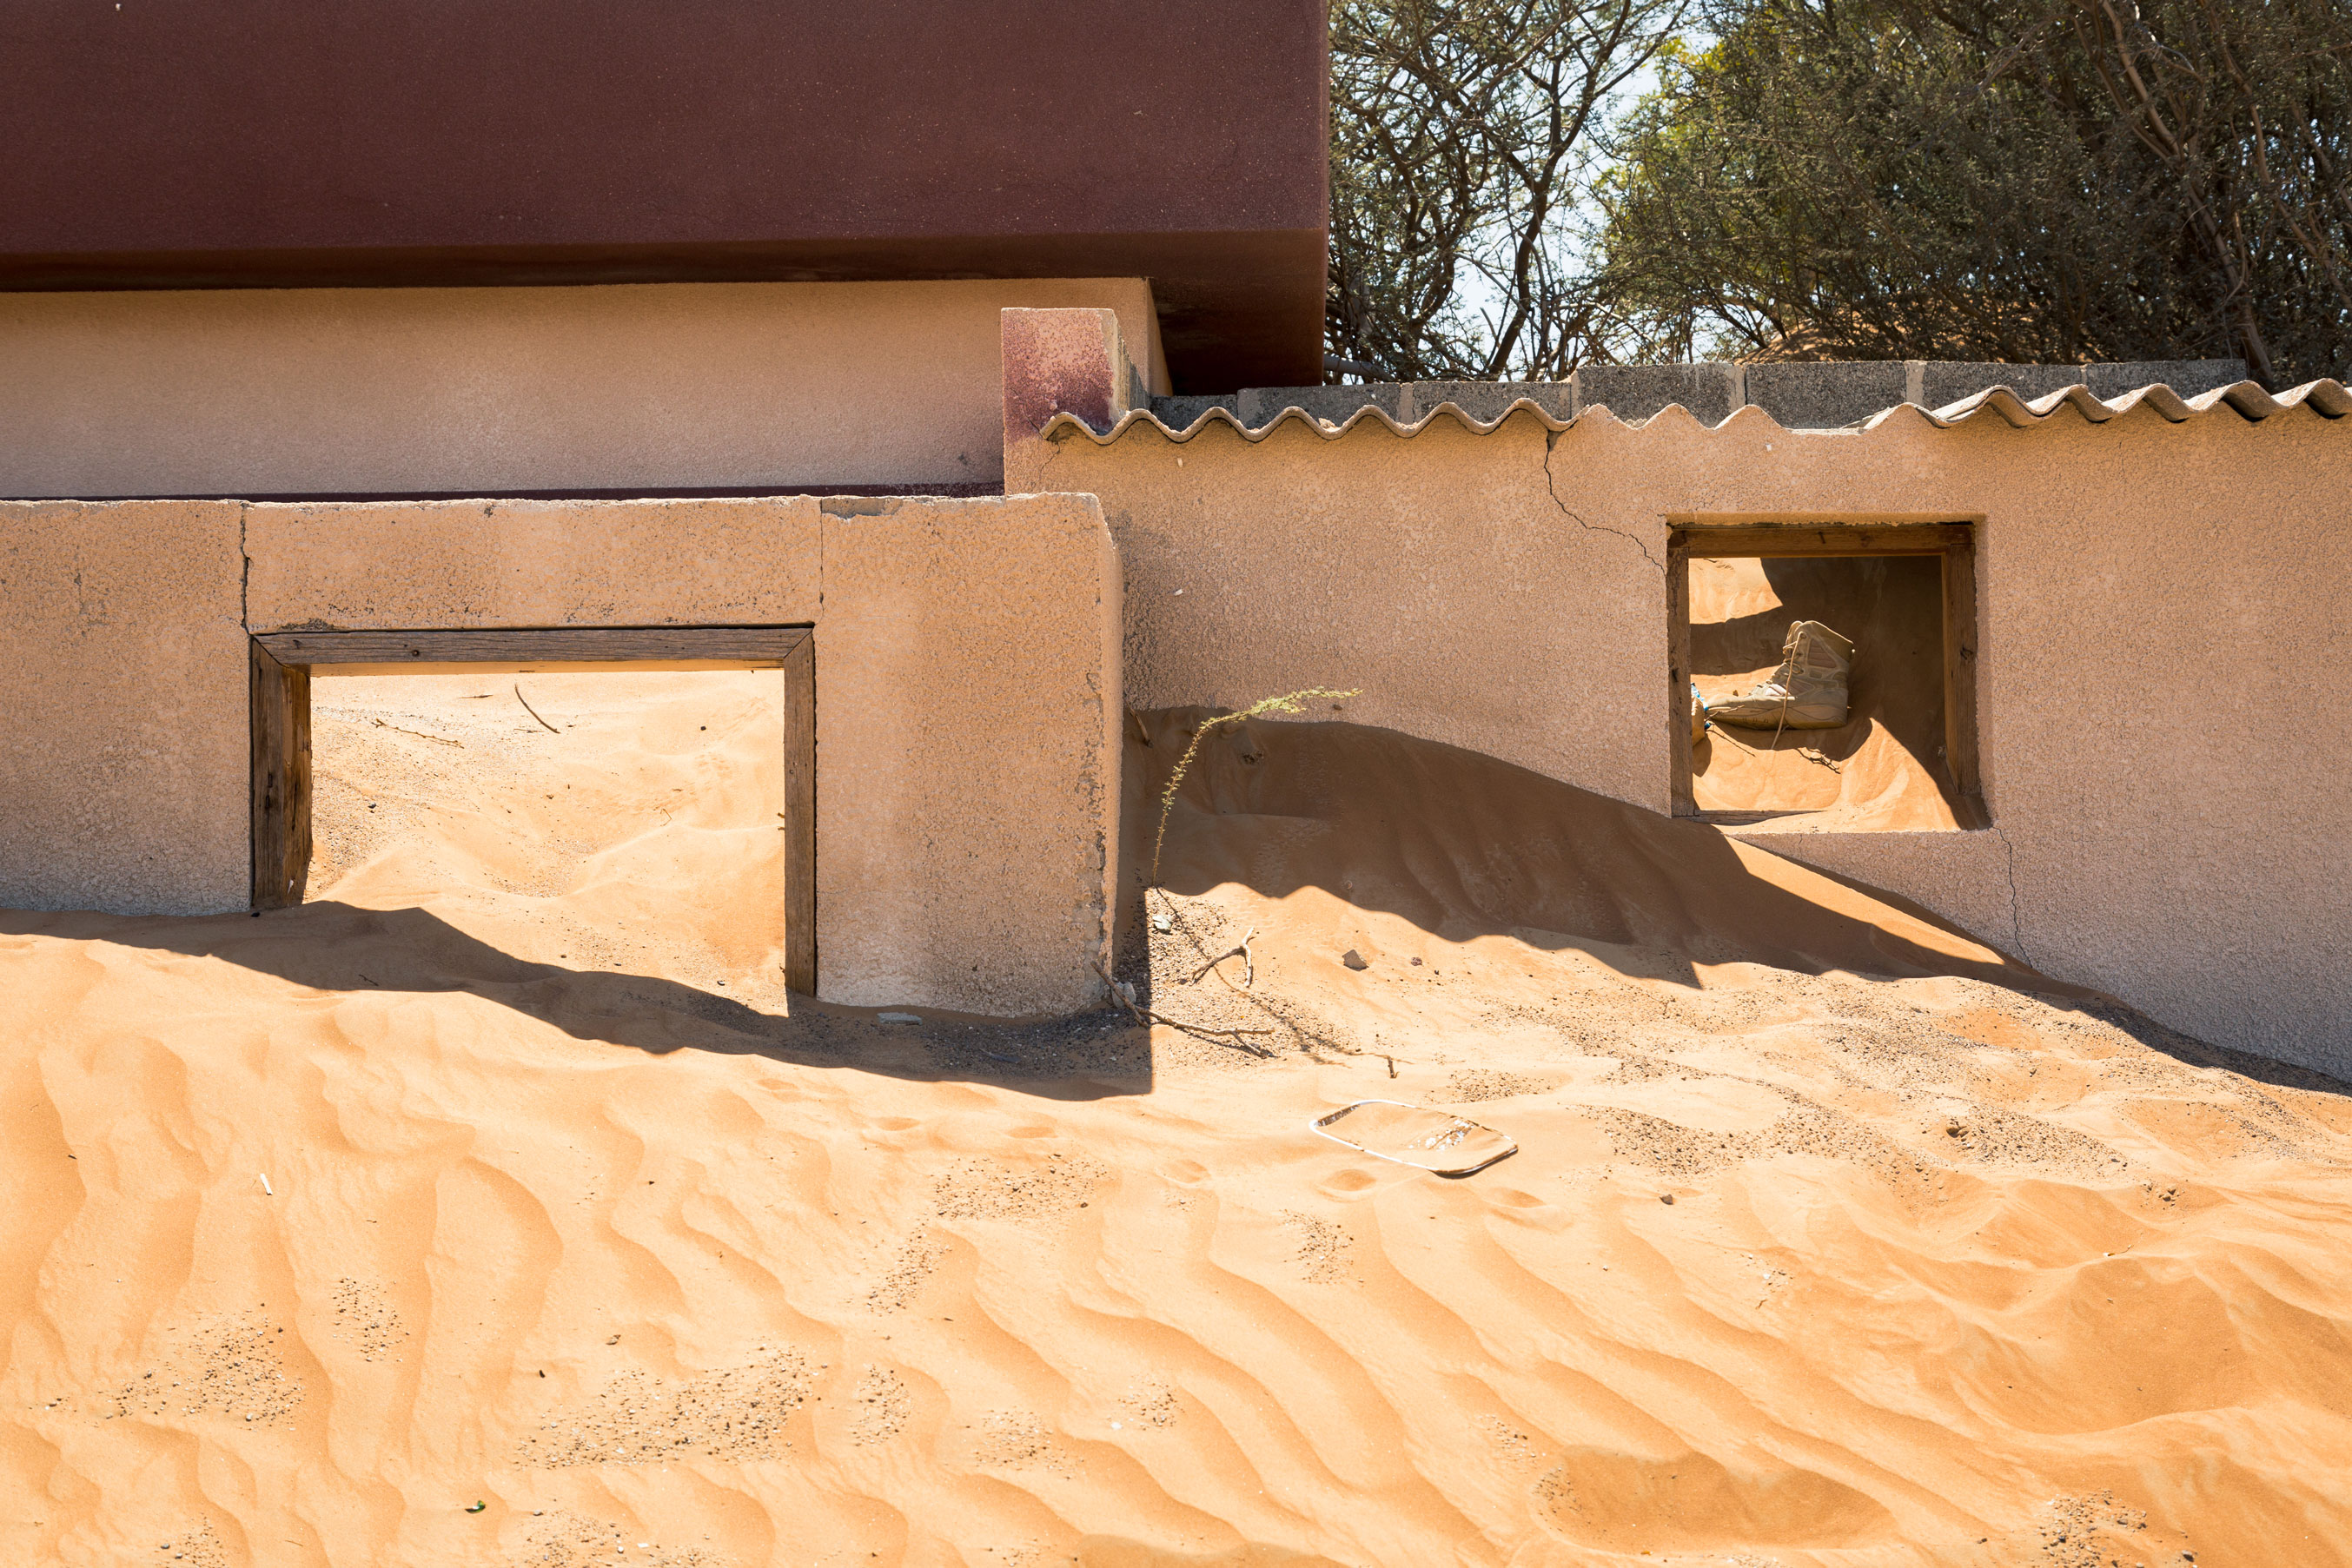 The hot Arabian Desert sand slowly overtakes one of many homes in this abandoned village. Although abandoned it is not forgotten, as evidenced by traces of ongoing human activity and items left behind.